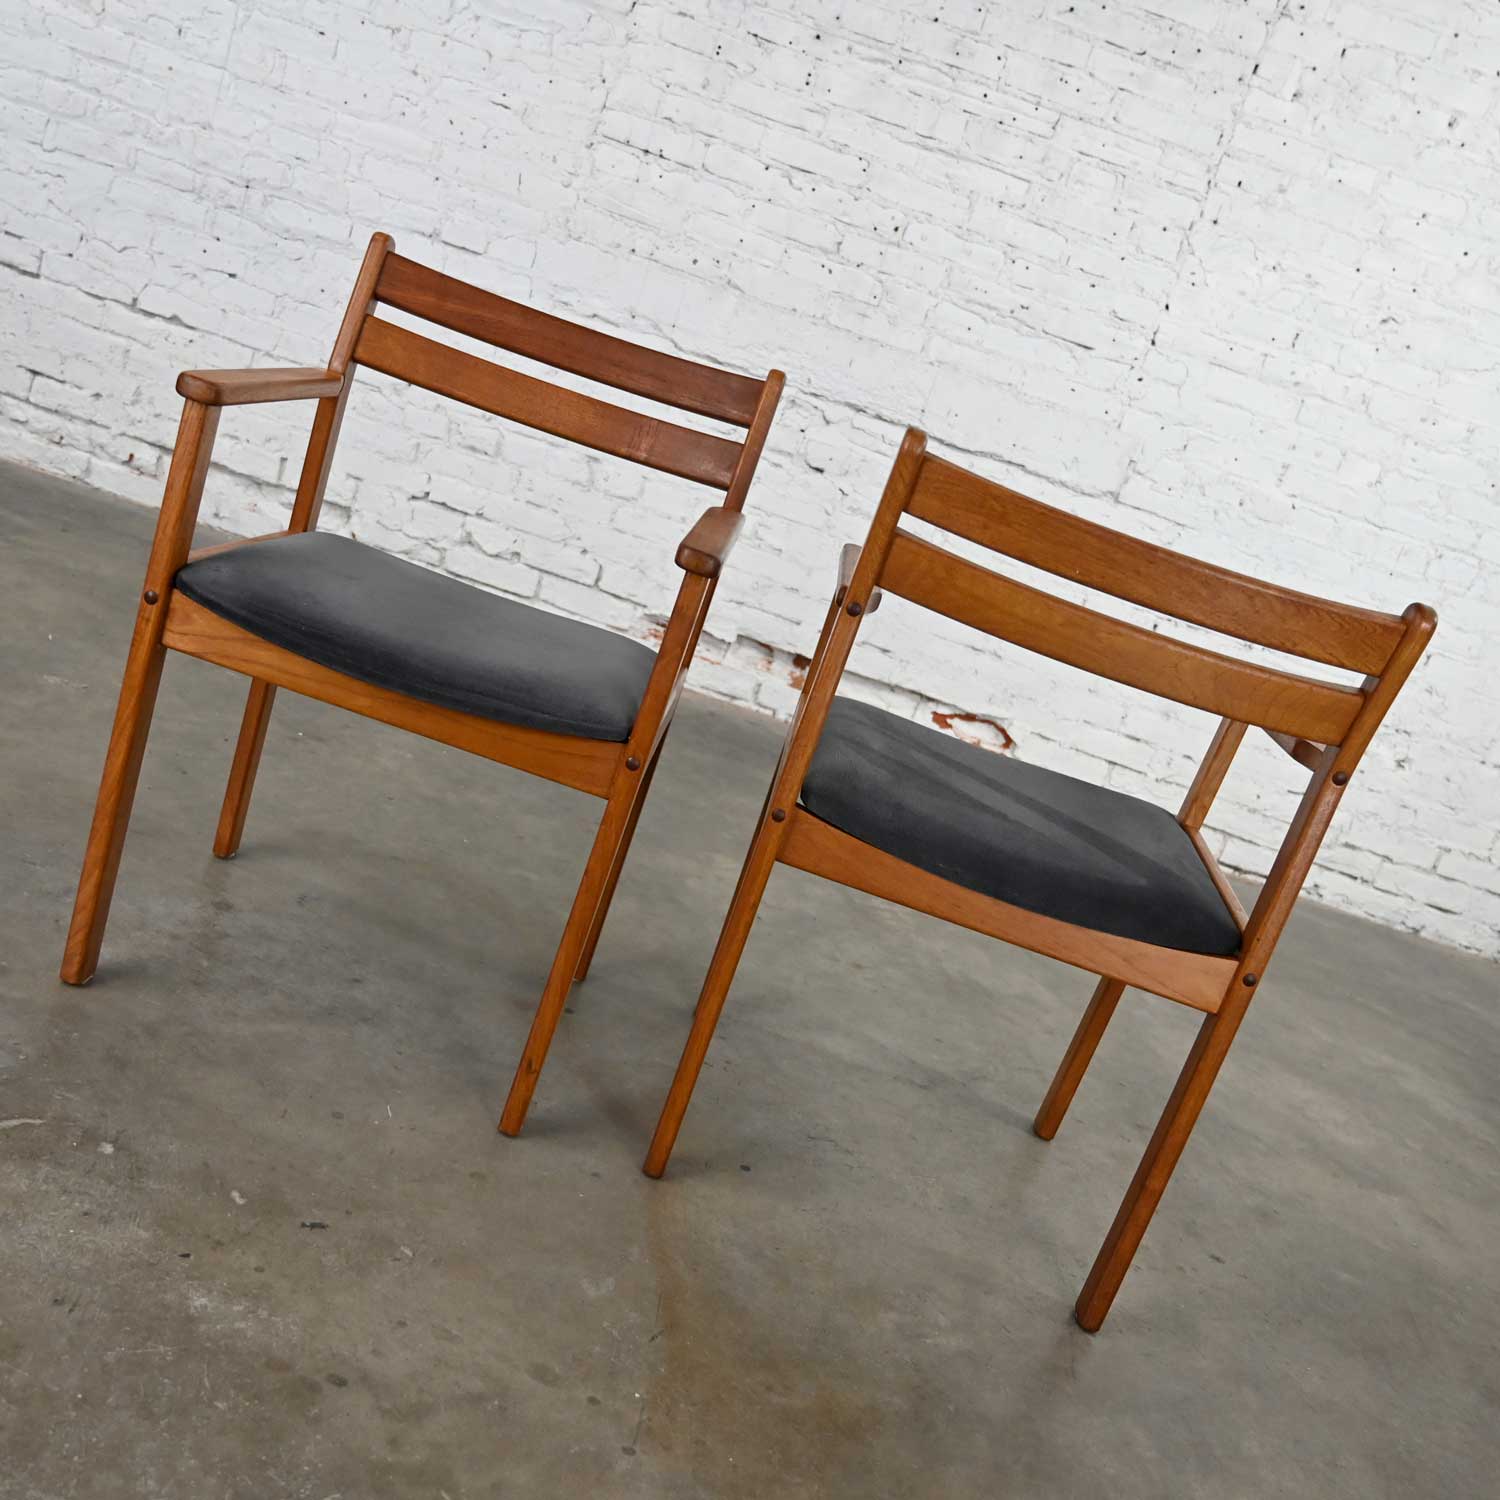 Scandinavian Modern Teak Pair of Armchairs with Brushed Charcoal Fabric Seat Cushions